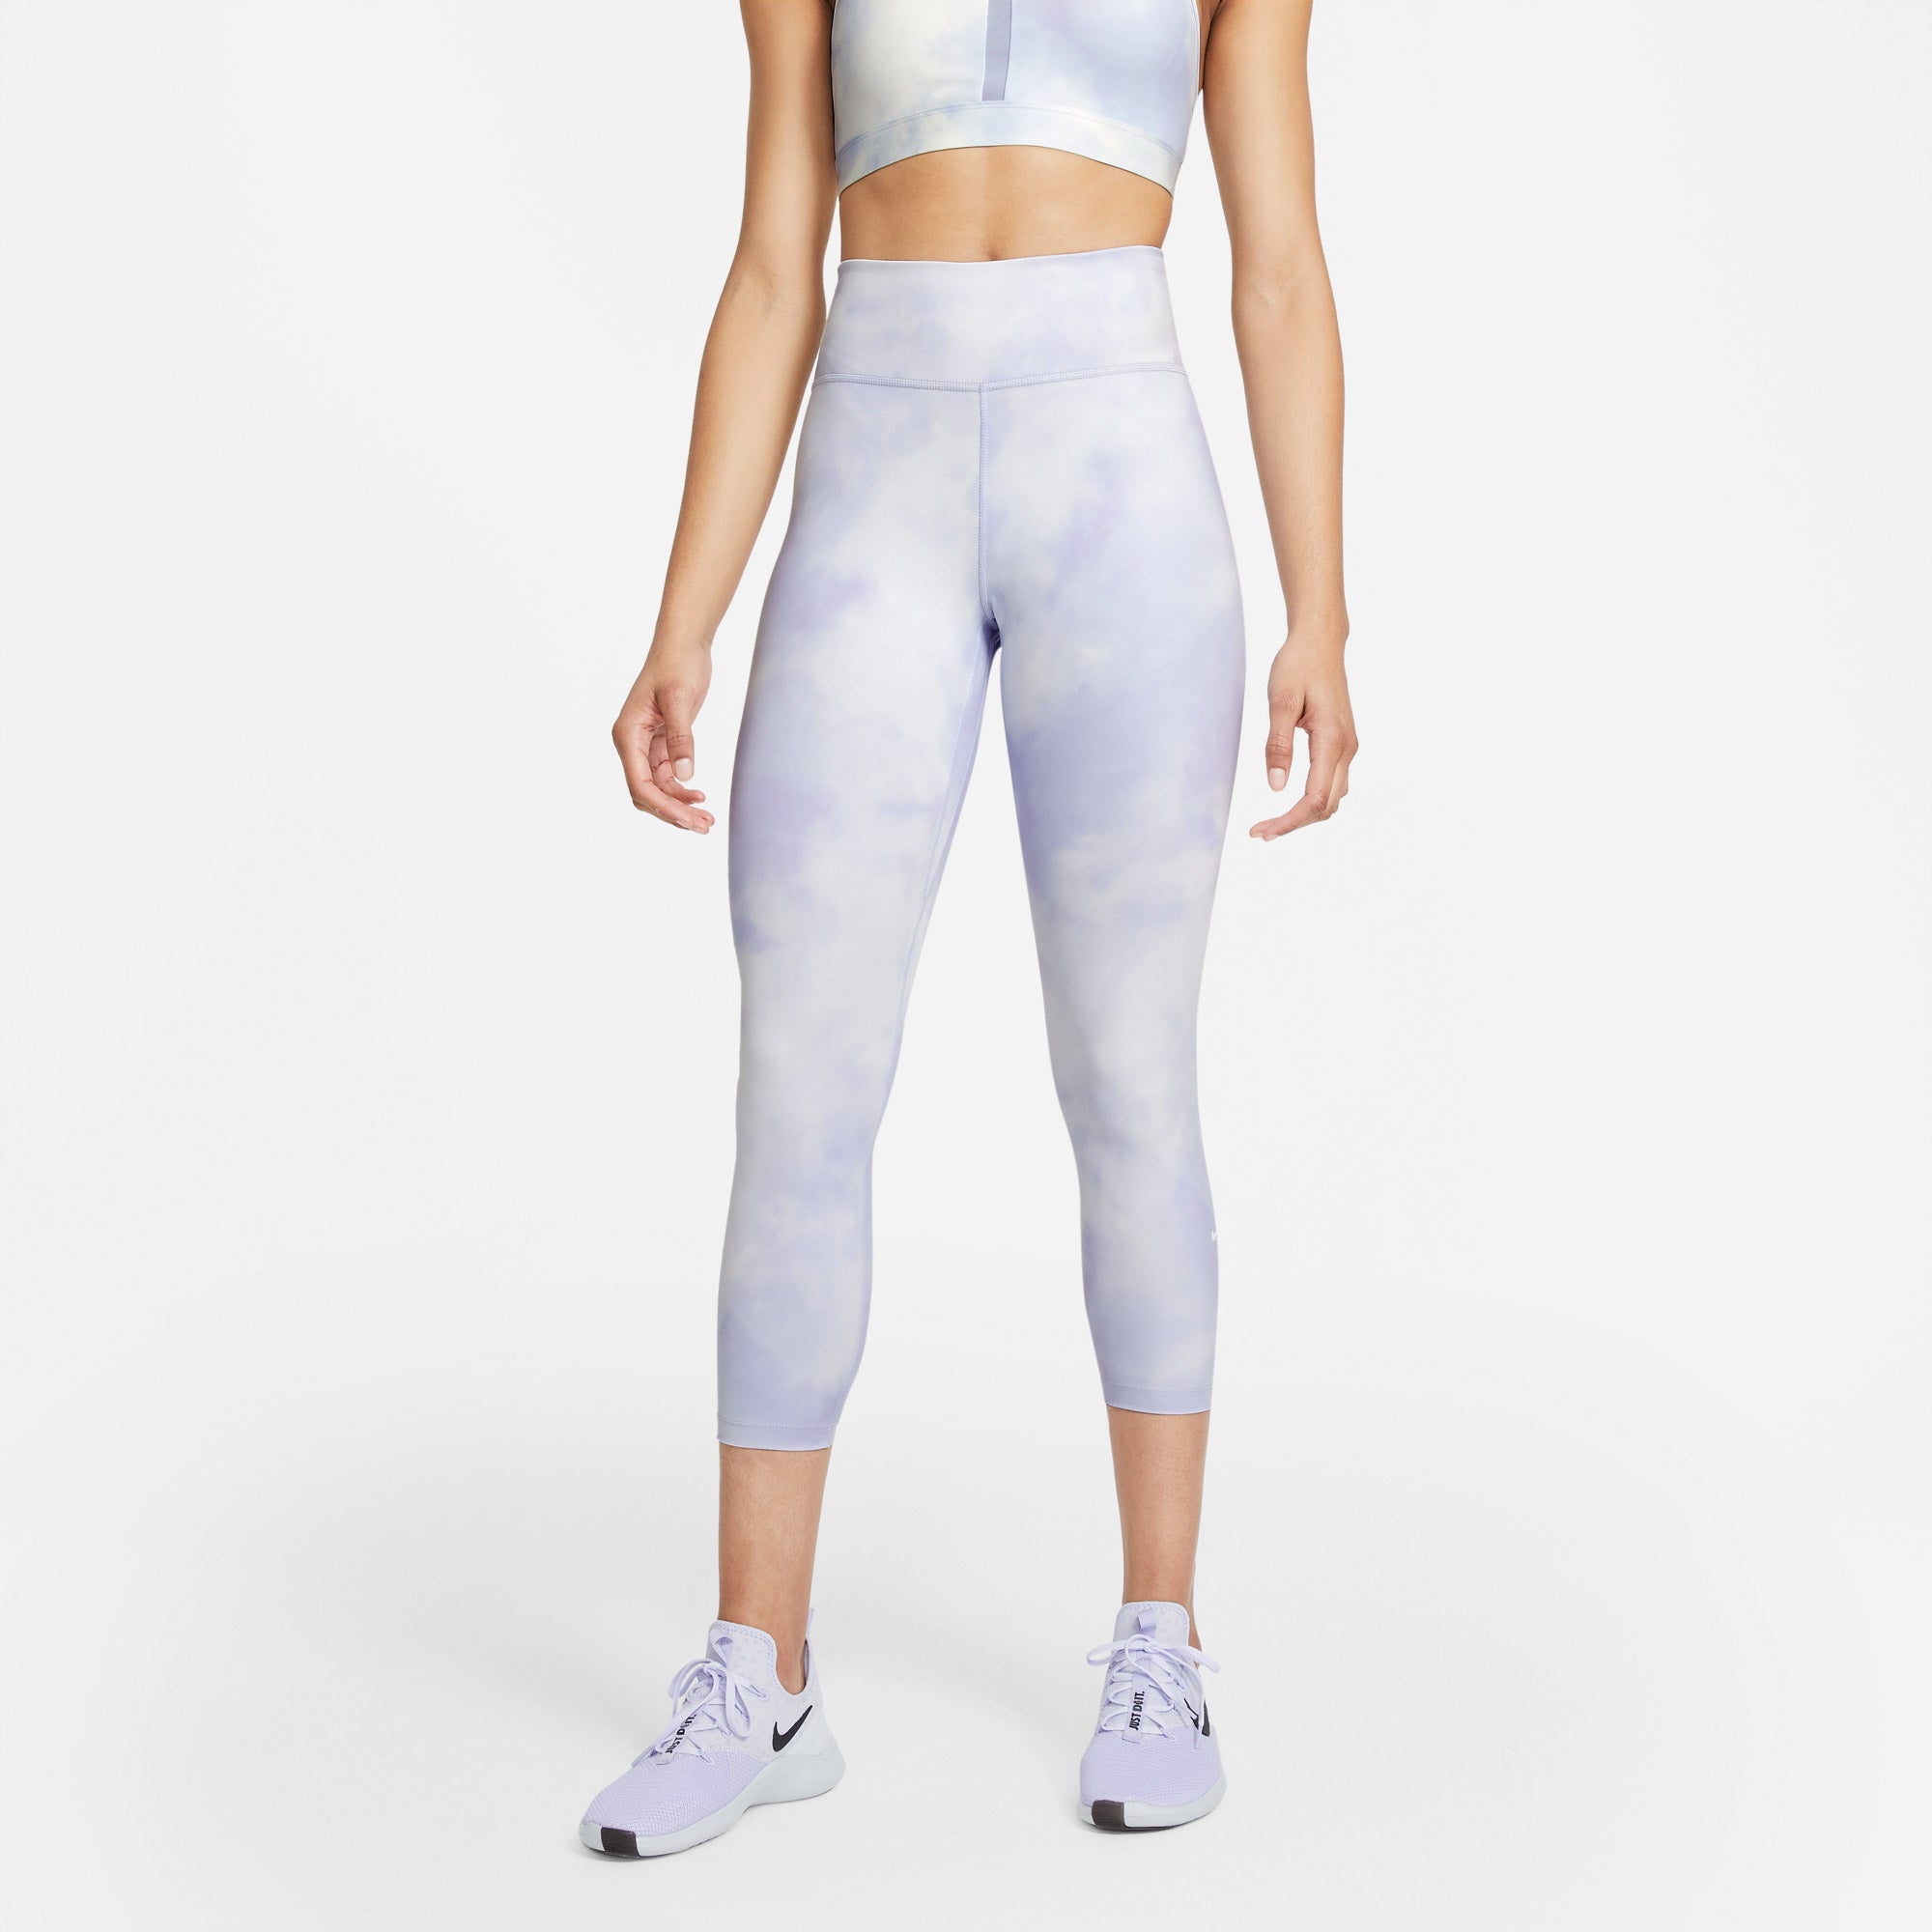 Nike One Icon Clash Women's Tights